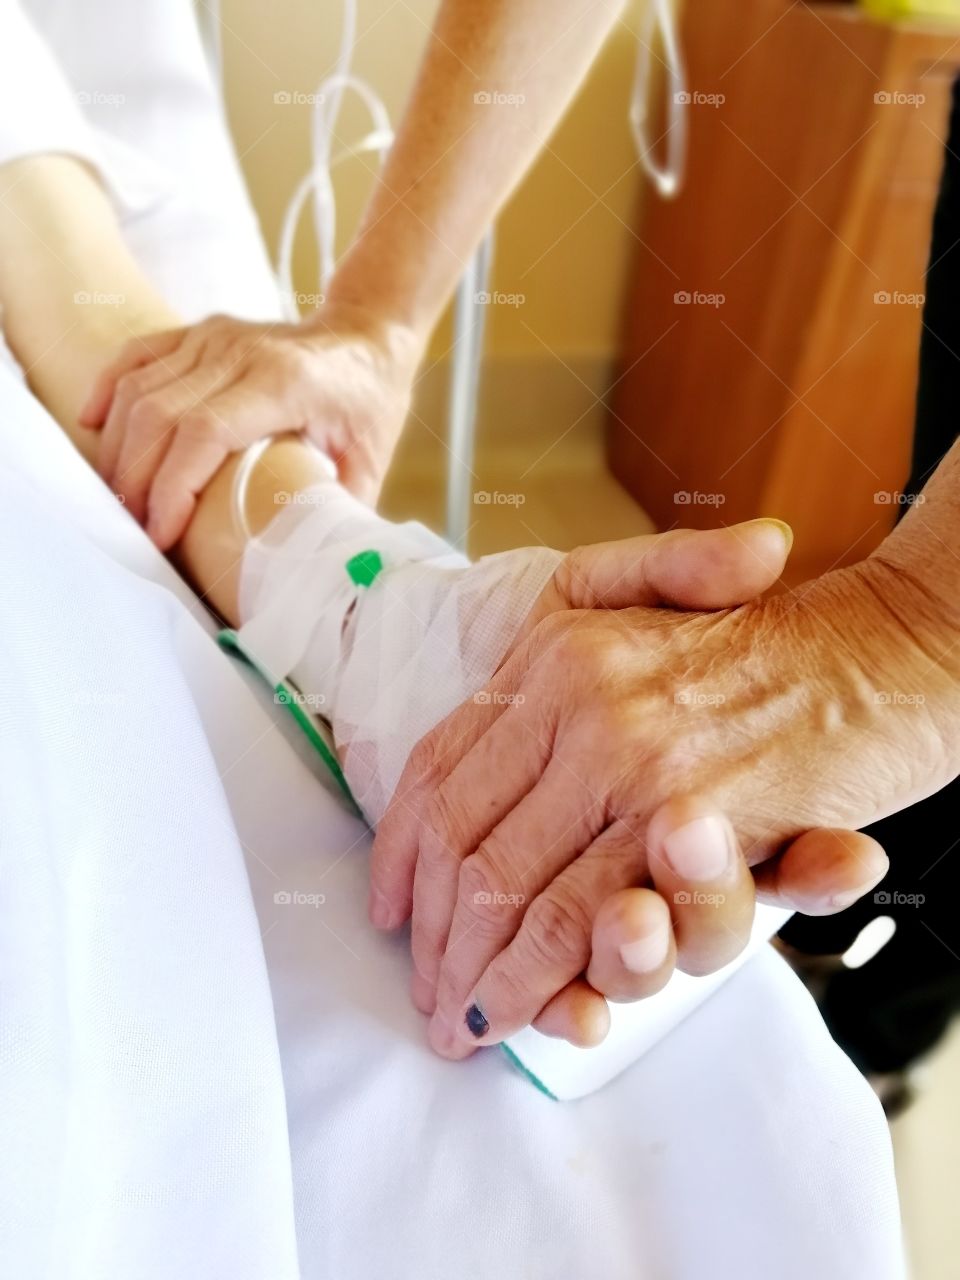 A wife holding the hand of her sick husband to show her love and support to him.